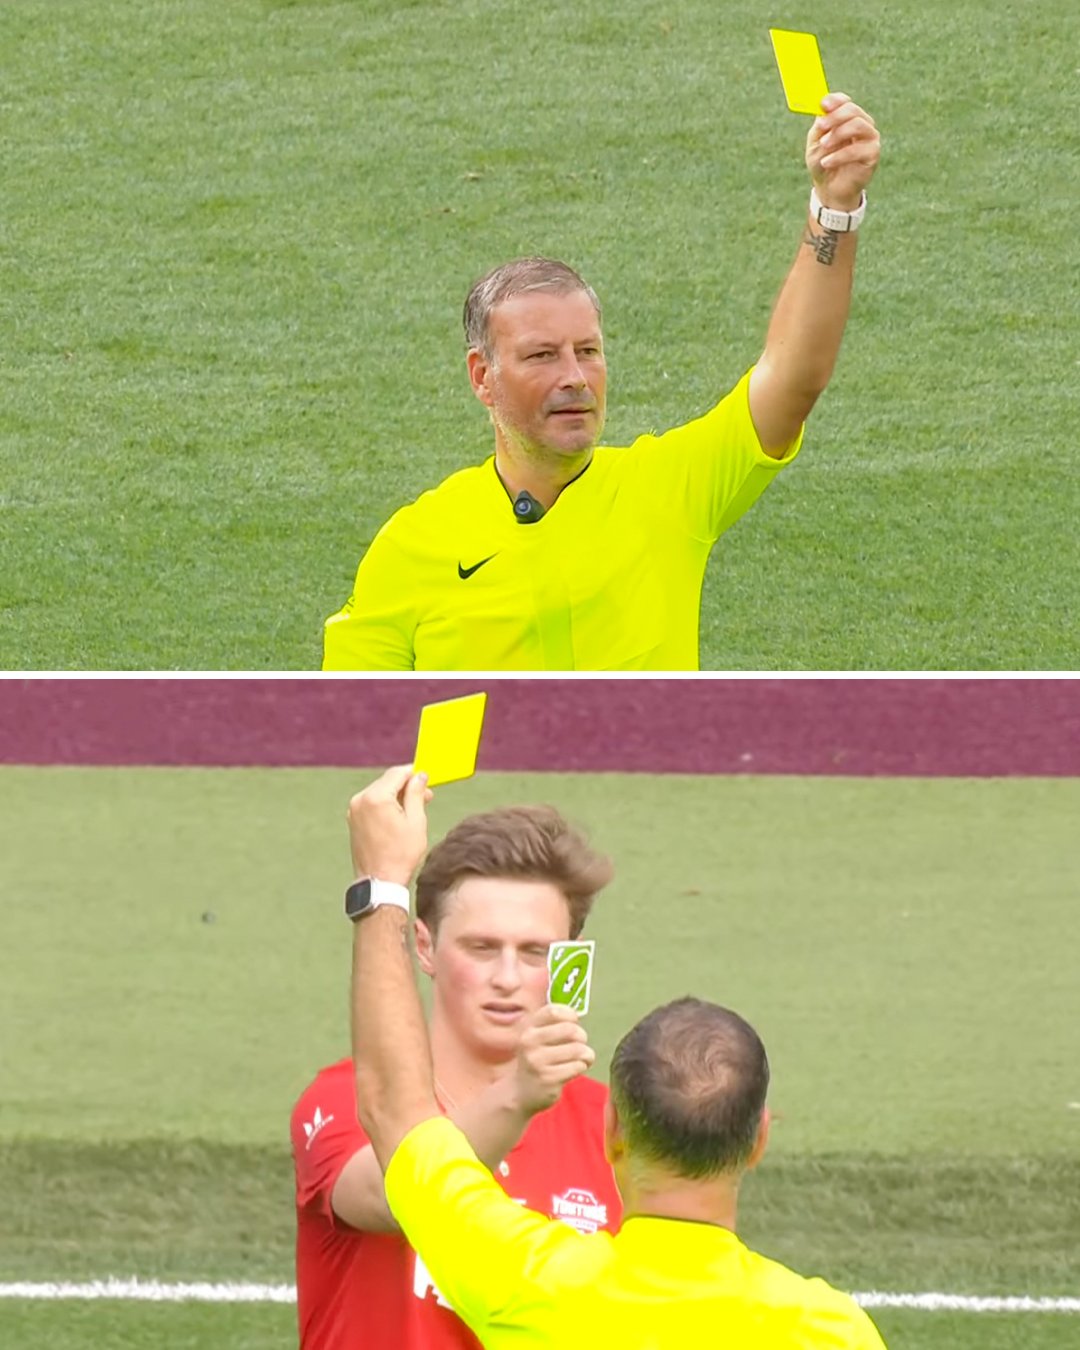 Player counters yellow card from referee with Uno reverse card Blank Meme Template